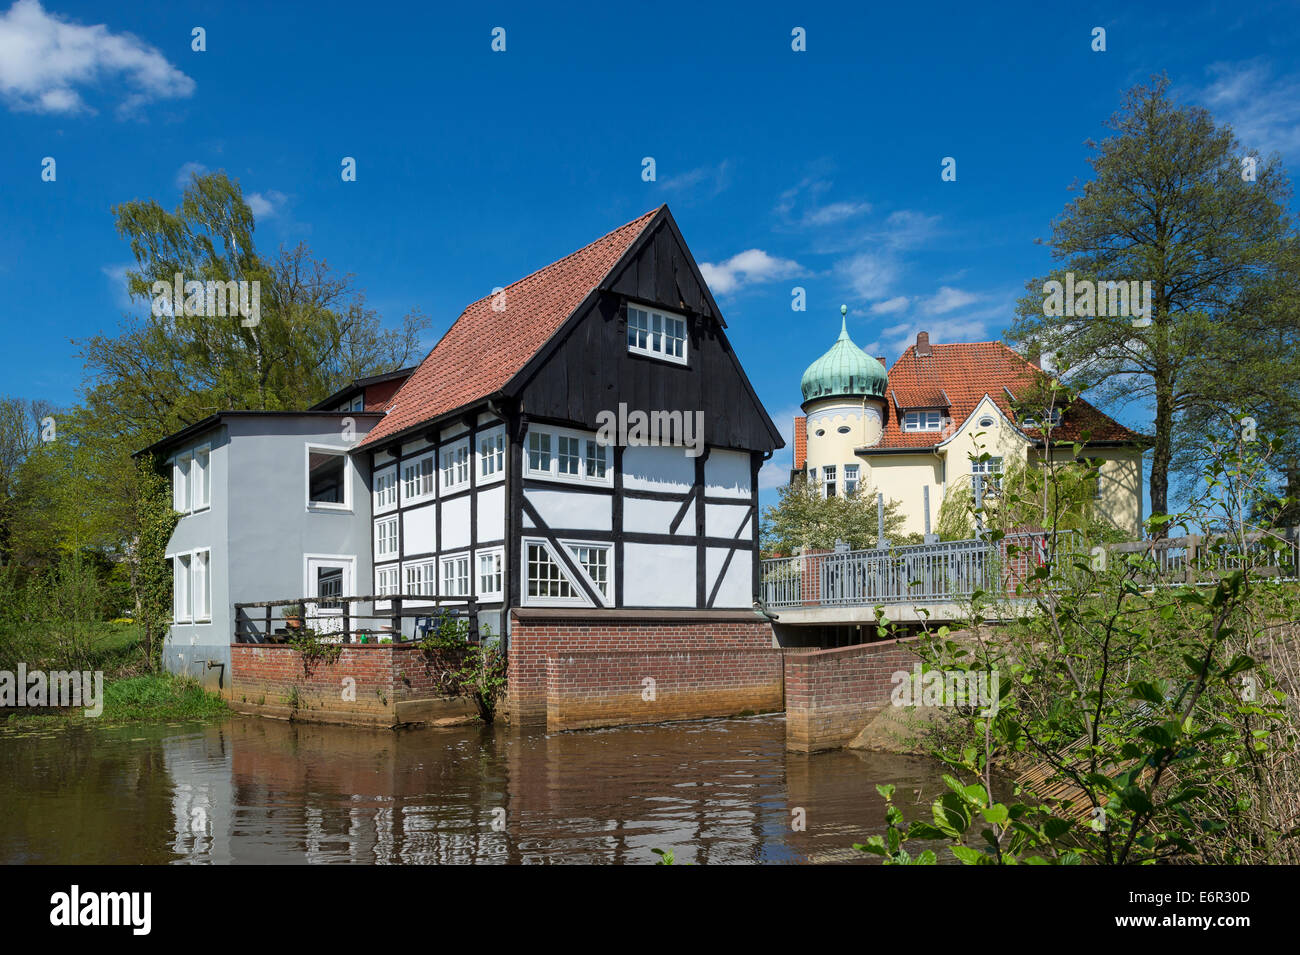 watermill and tumbraegel house in vechta, vechta district, oldenburger münsterland, lower saxony, germany Stock Photo